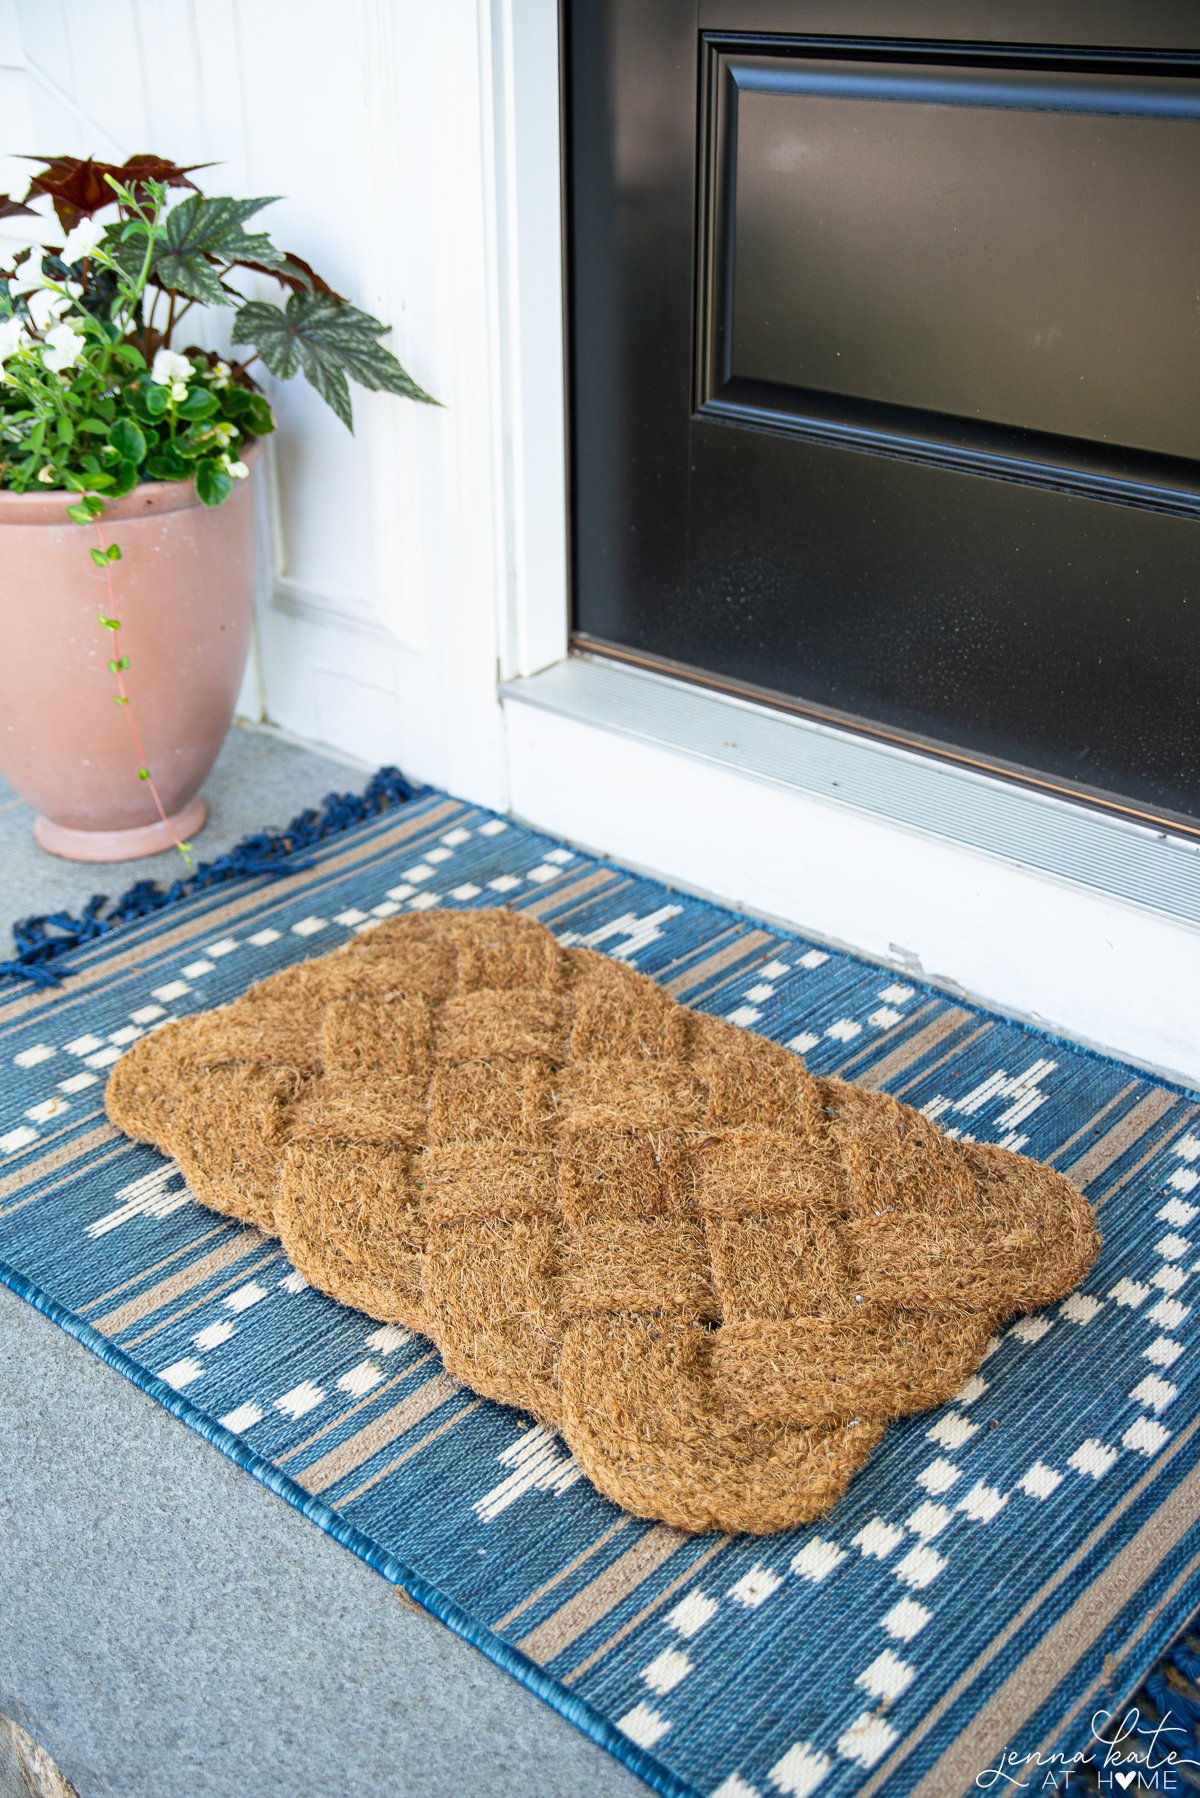 Braided coir doormat from Amazon on top of a blue rug.